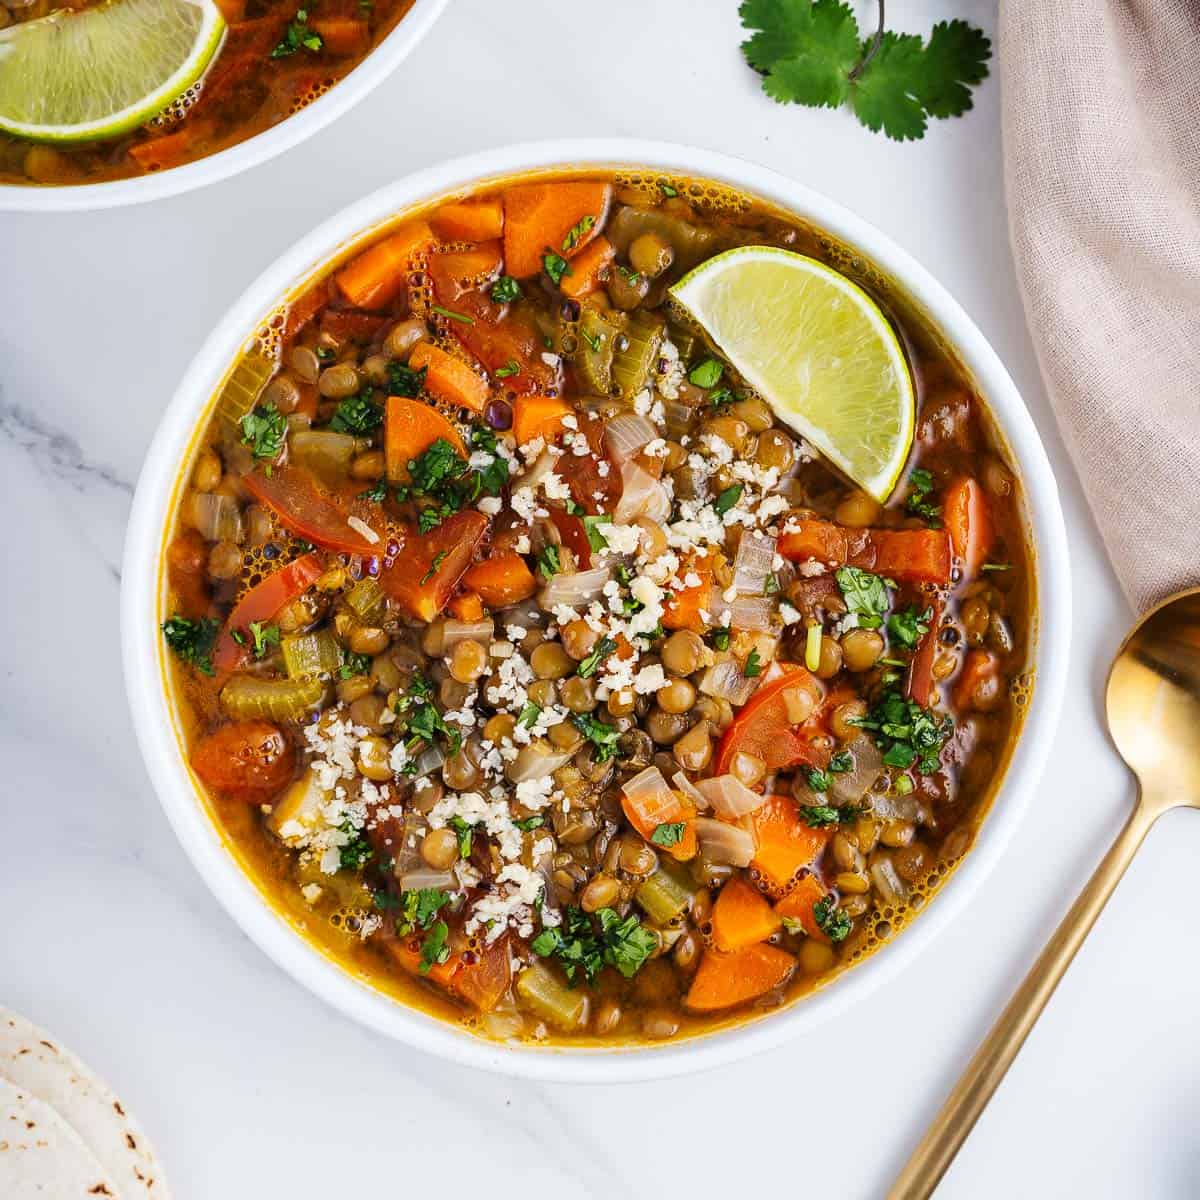 Colorful soup of lentils with carrot, rice and cilantro garnished with lime wedge in a white bowl.